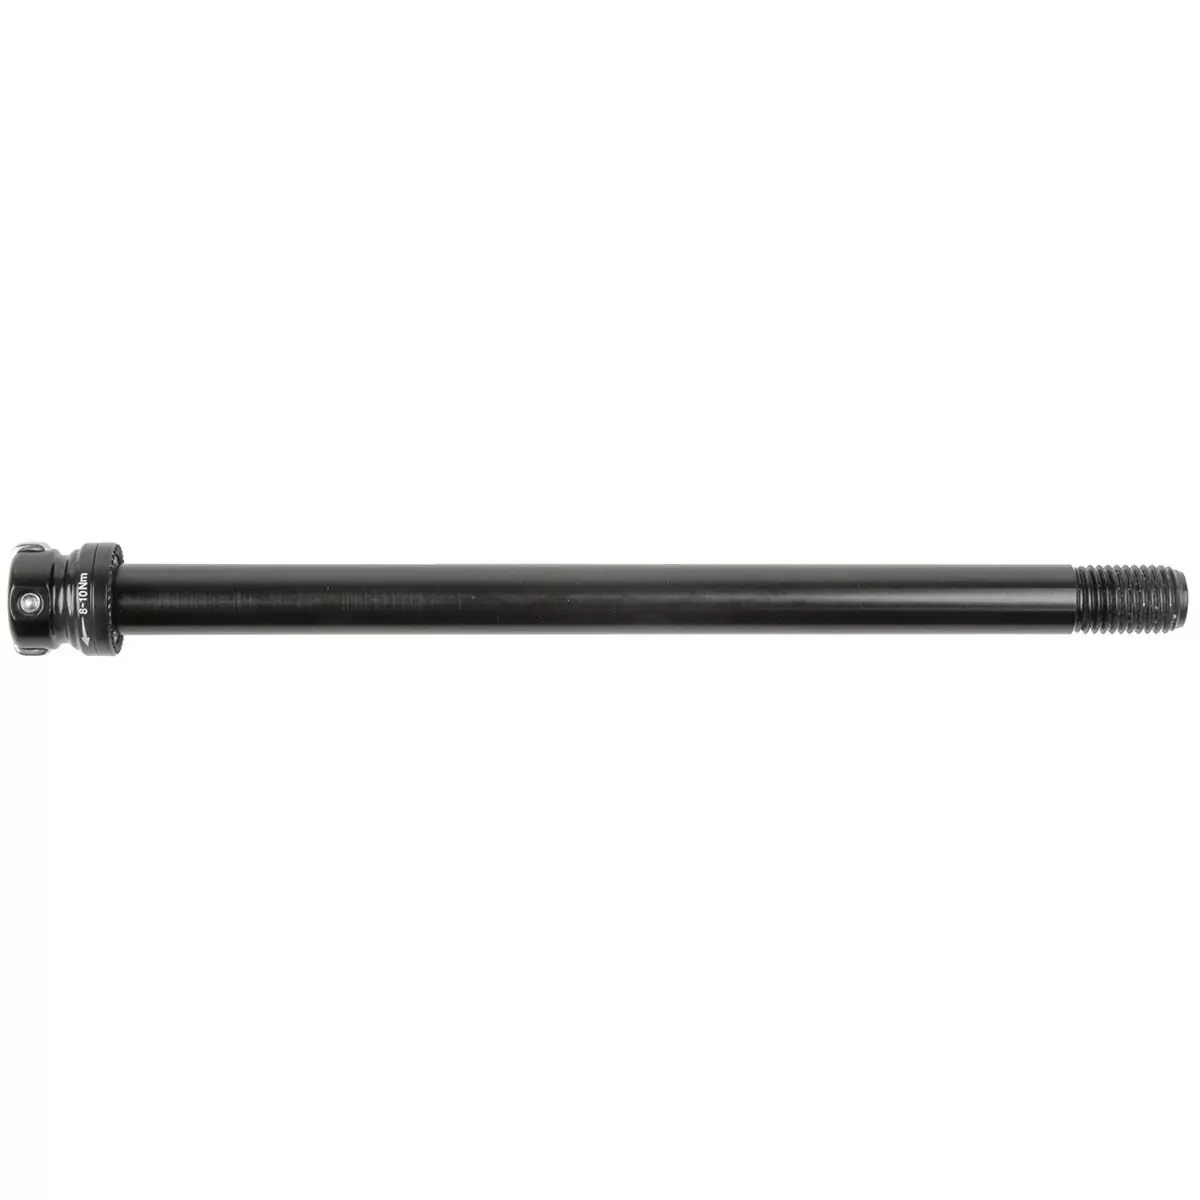 Thru Axle 12x142 Length 157mm With Retractable Lever - image